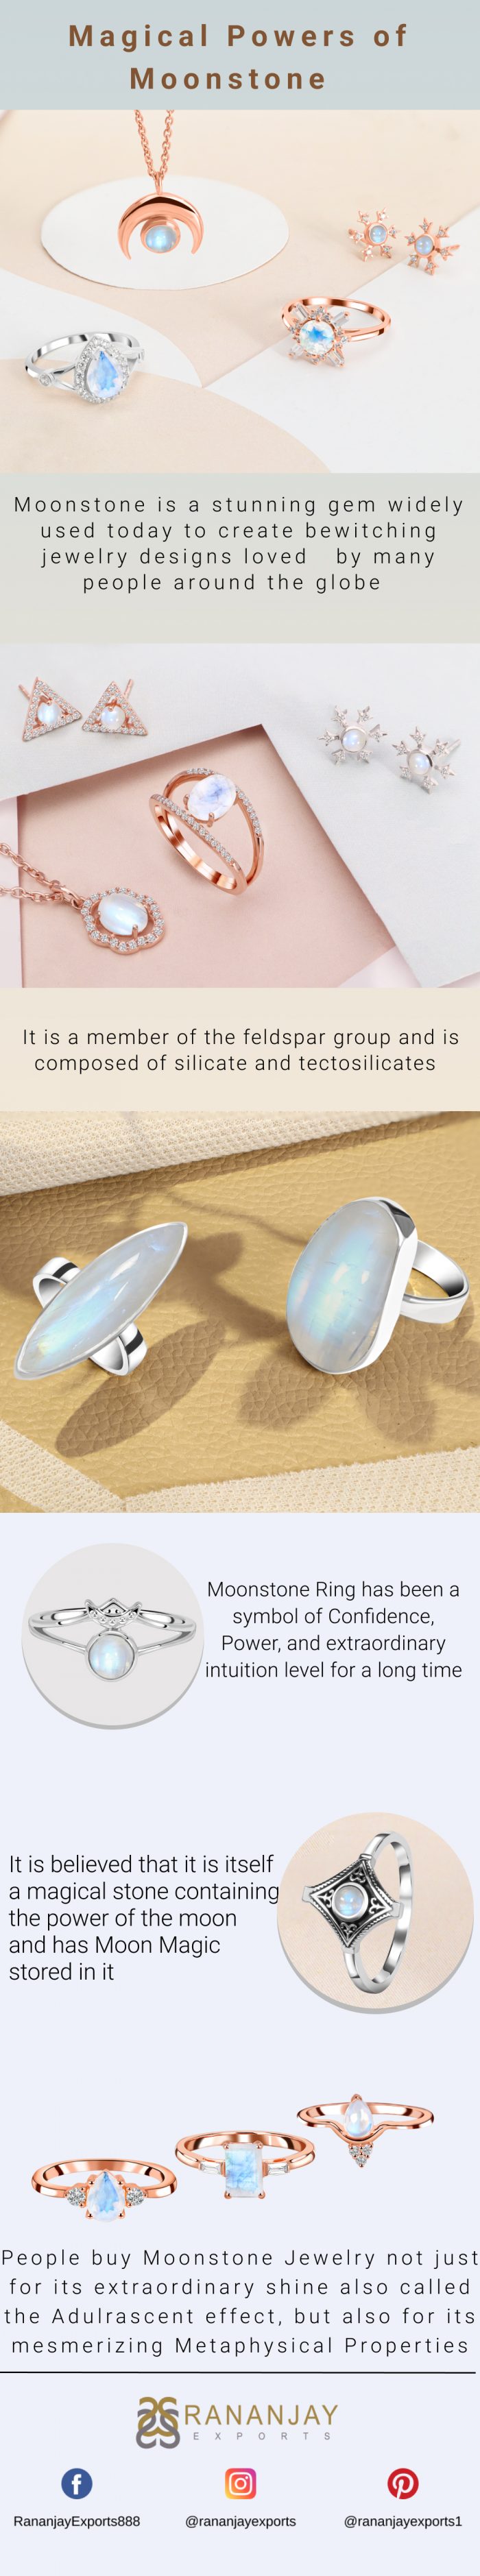 Magical Powers of Moonstone